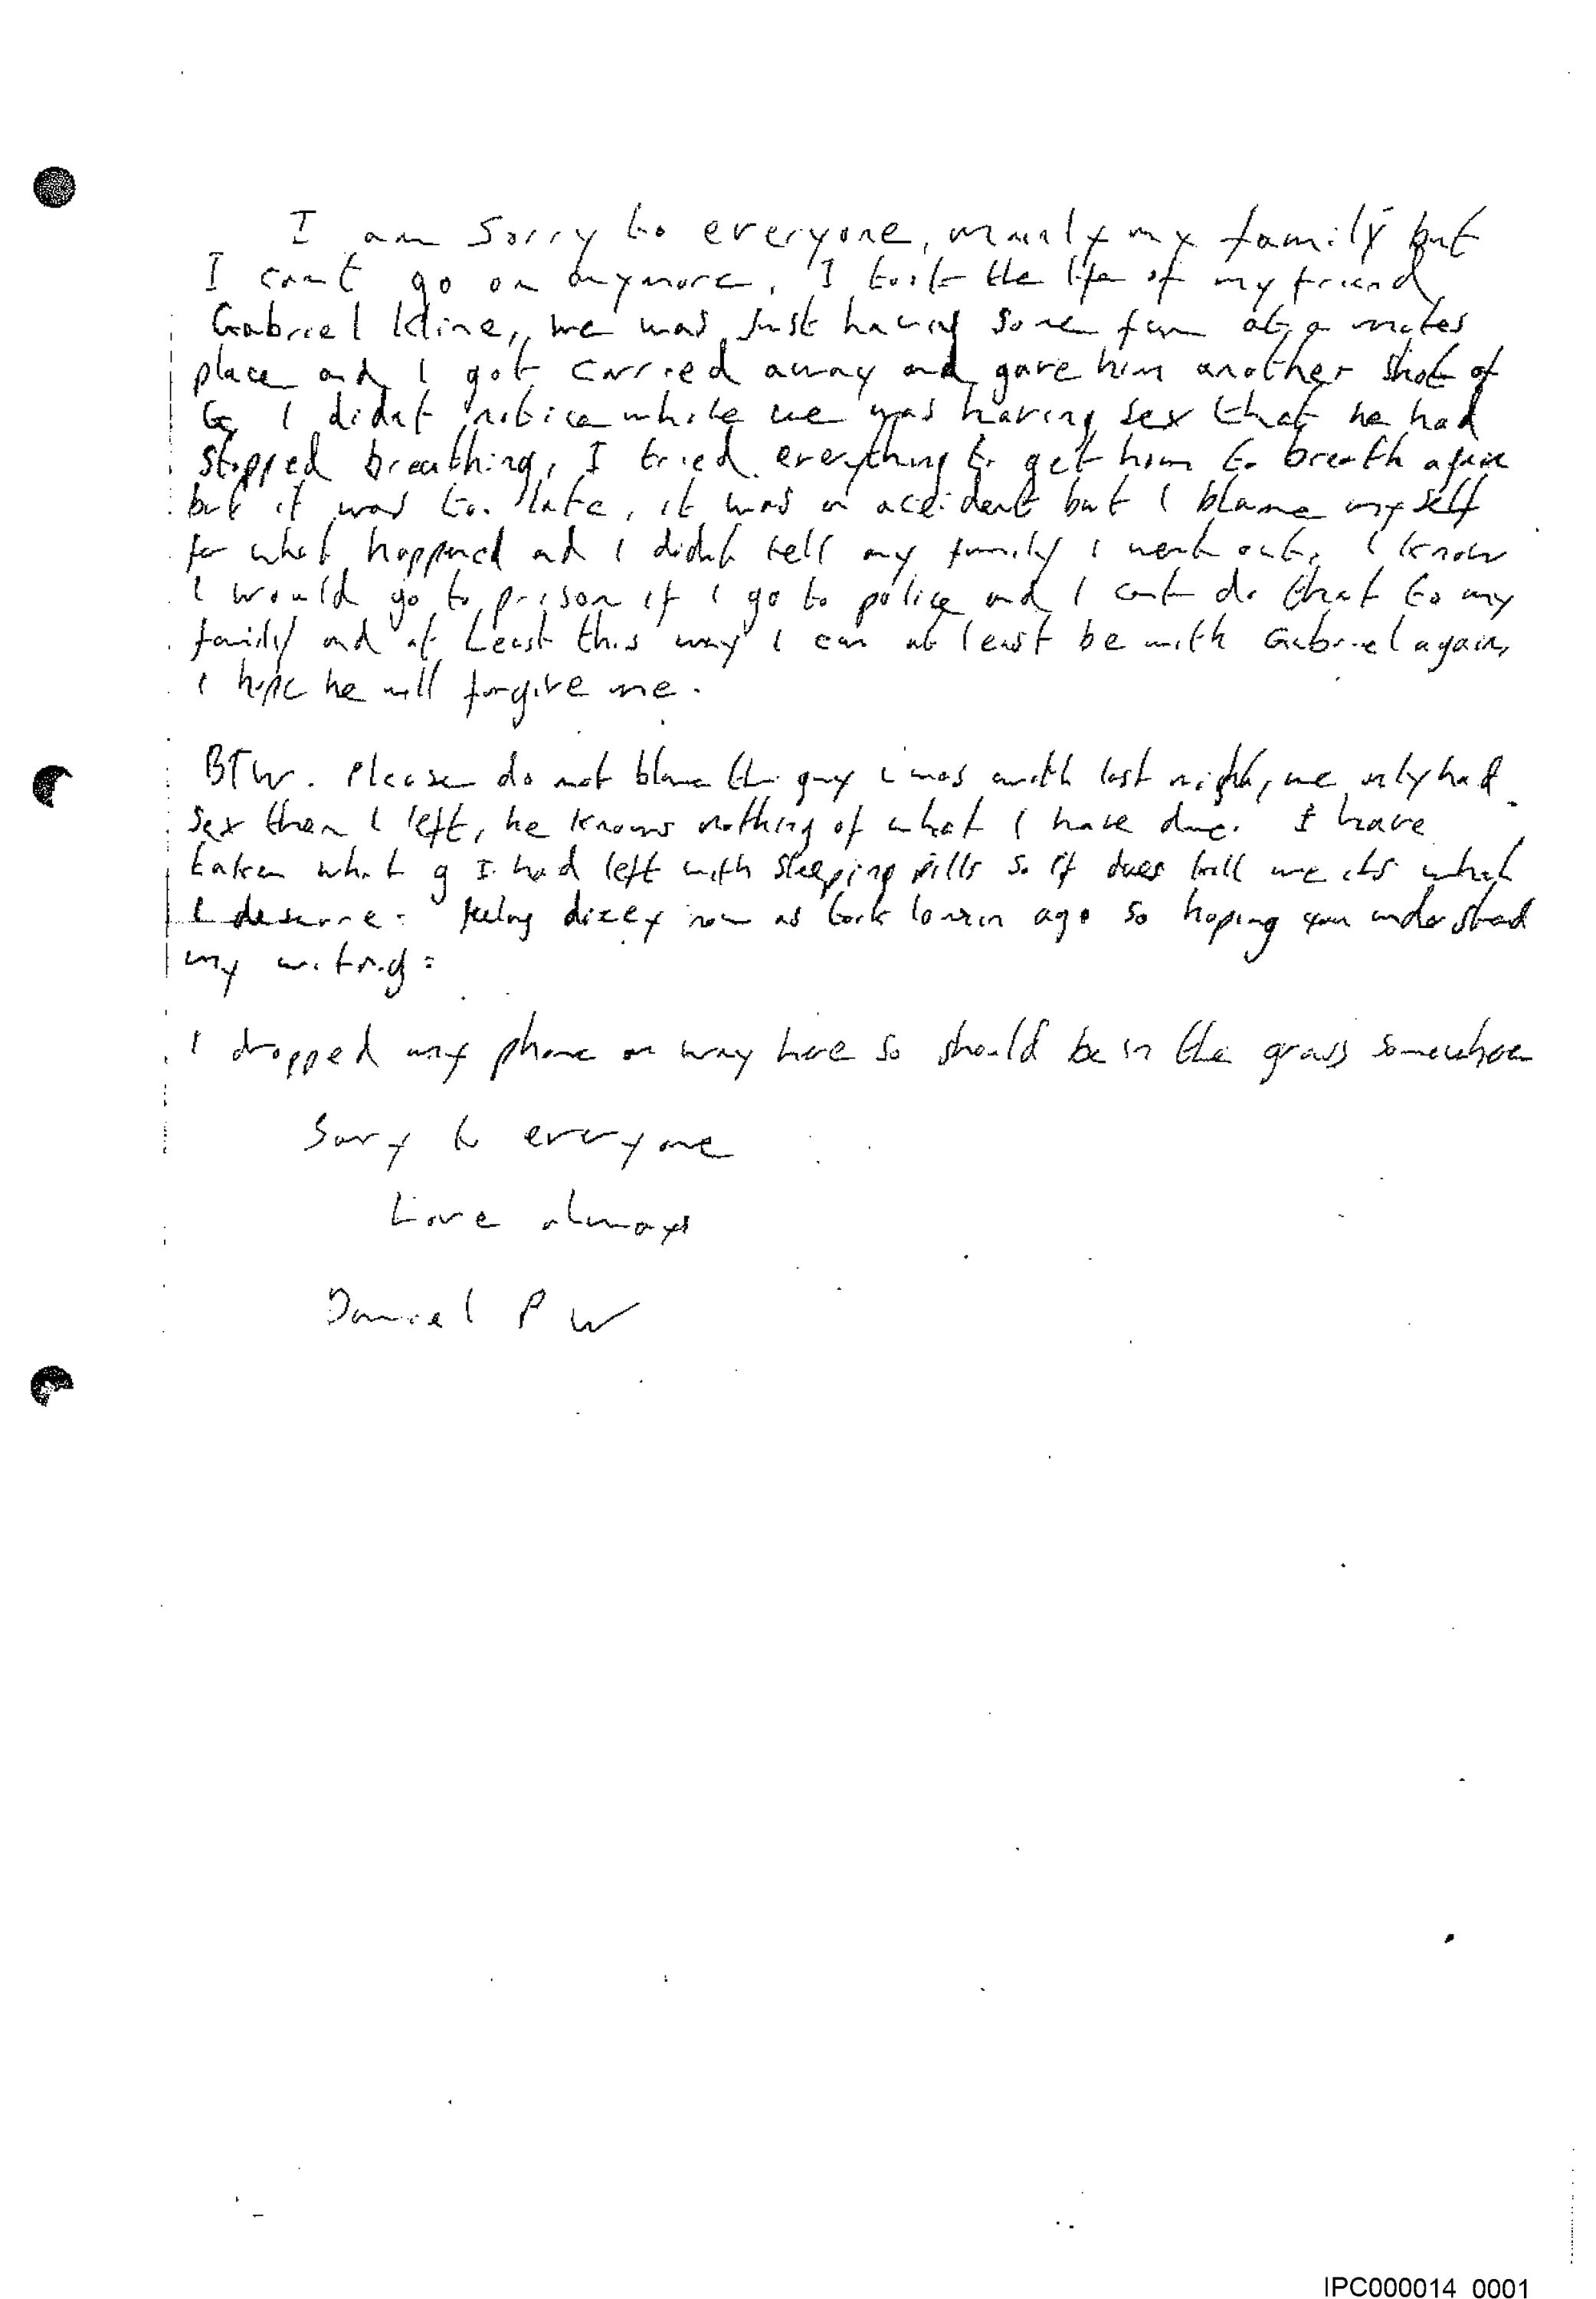 The fake suicide note, written by Port, was found on Mr Whitworth’s body.